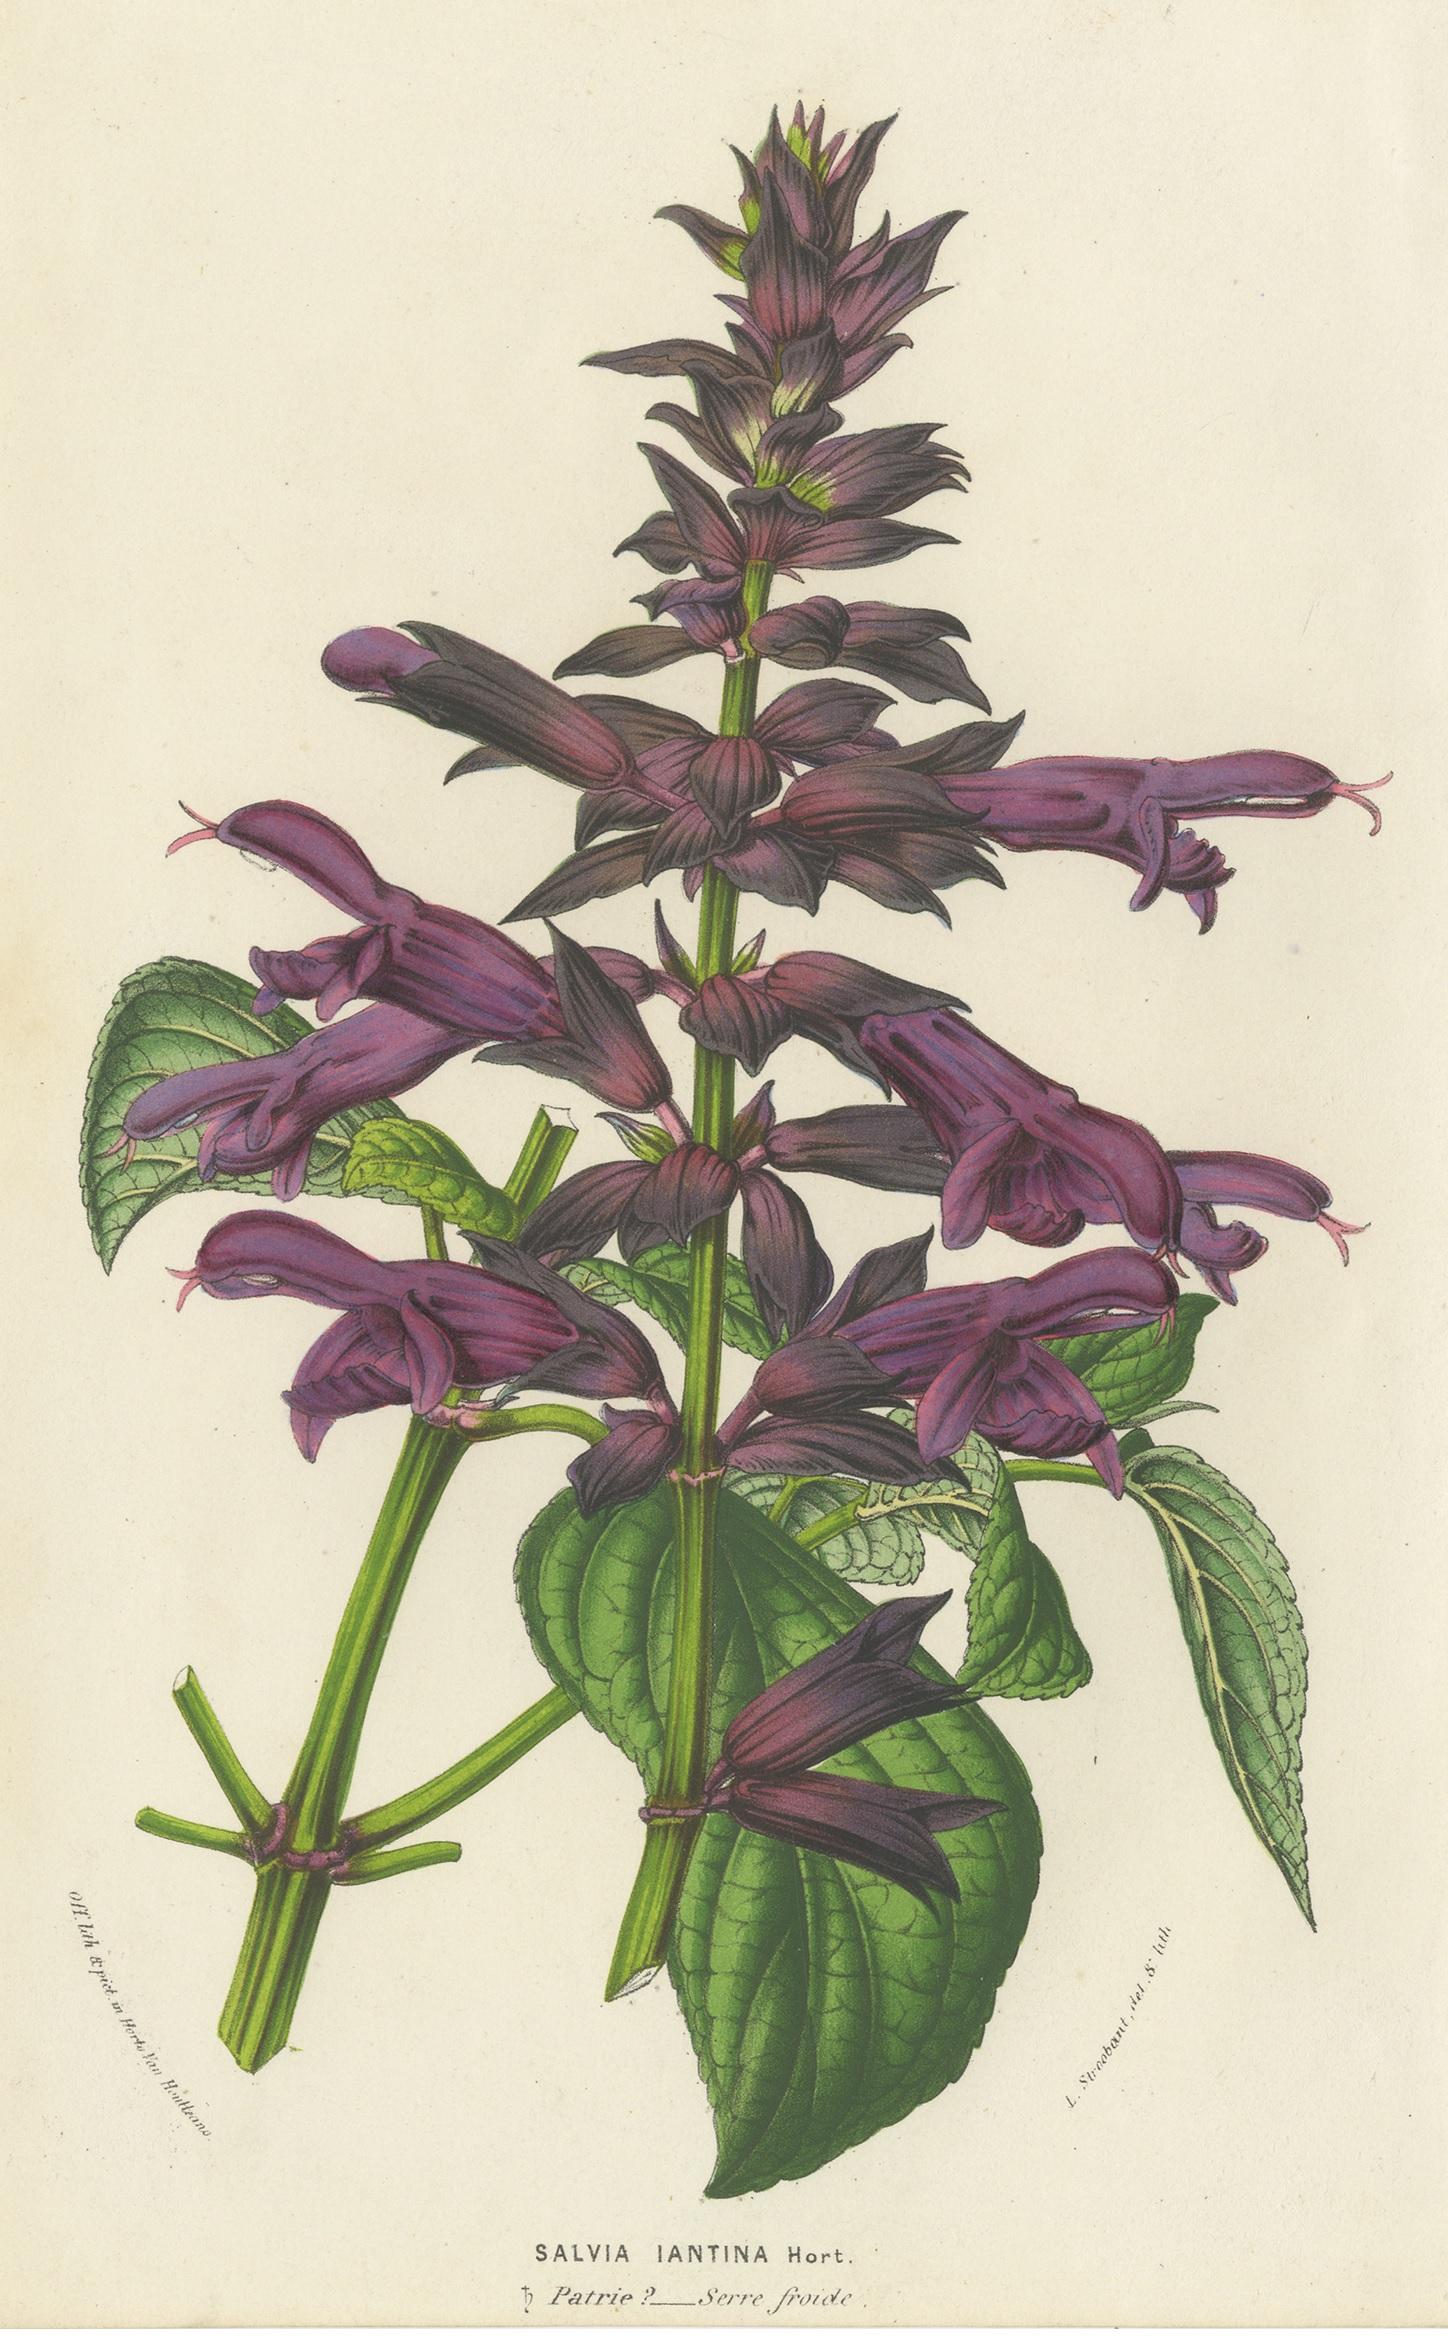 Antique botany print titled 'Salvia Iantina'. Lithograph of purple sage. This print originates from volume 9 of 'Flore des Serres' by Louis van Houtte. Published between 1853 and 1854.